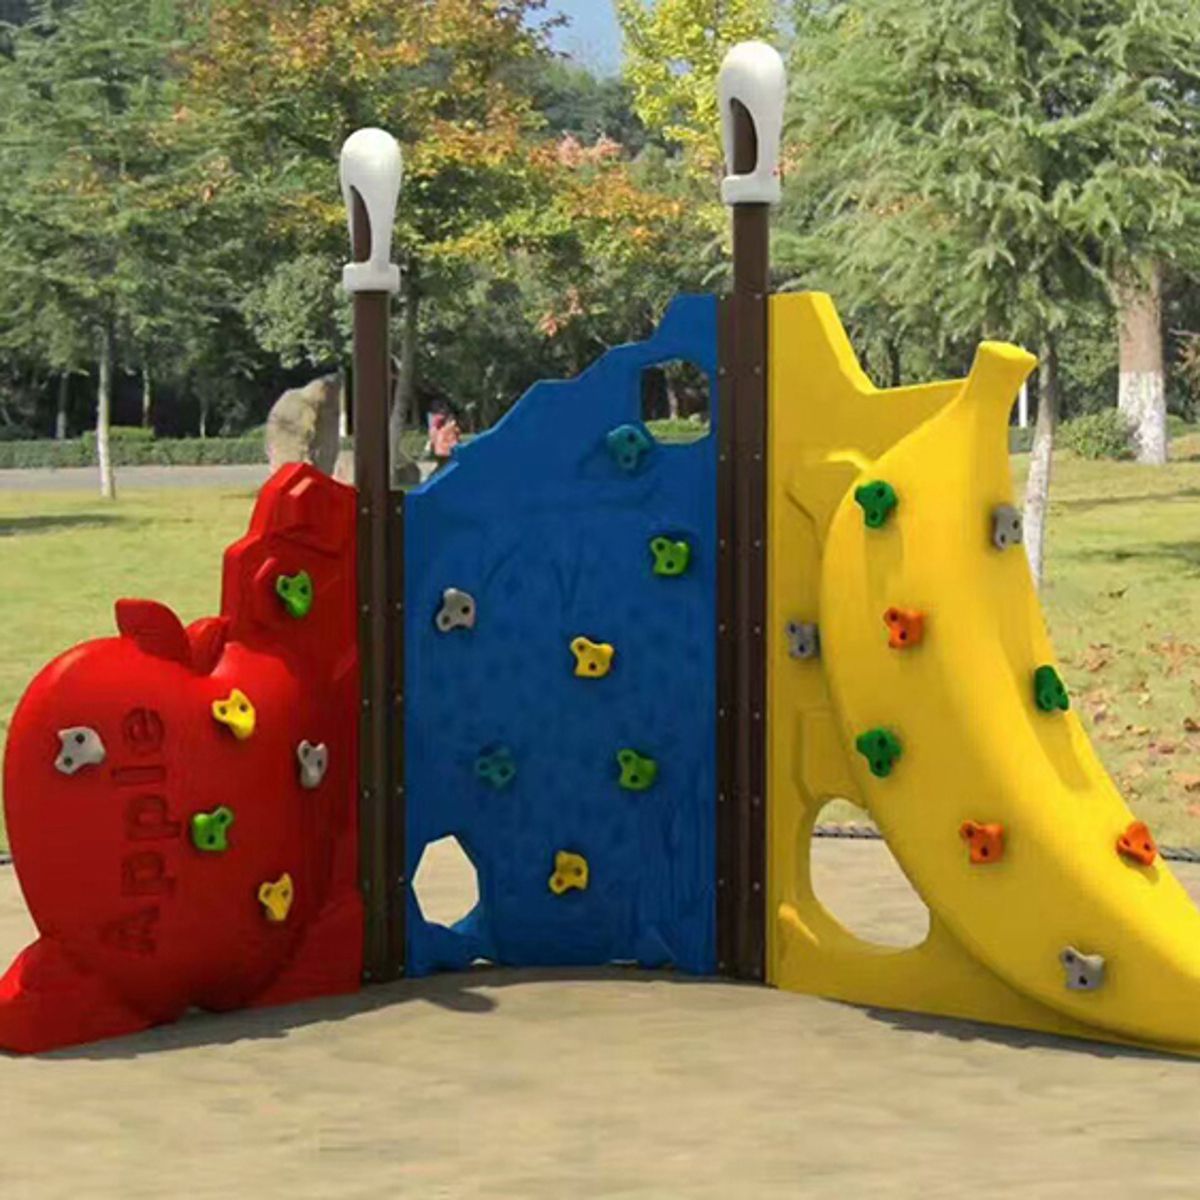 10pcs-Plastic-Colorful-Textured-Climb-Rock-Wall-Stones-Kids-Assorted-Holds-Climbing-Ascender-1353092